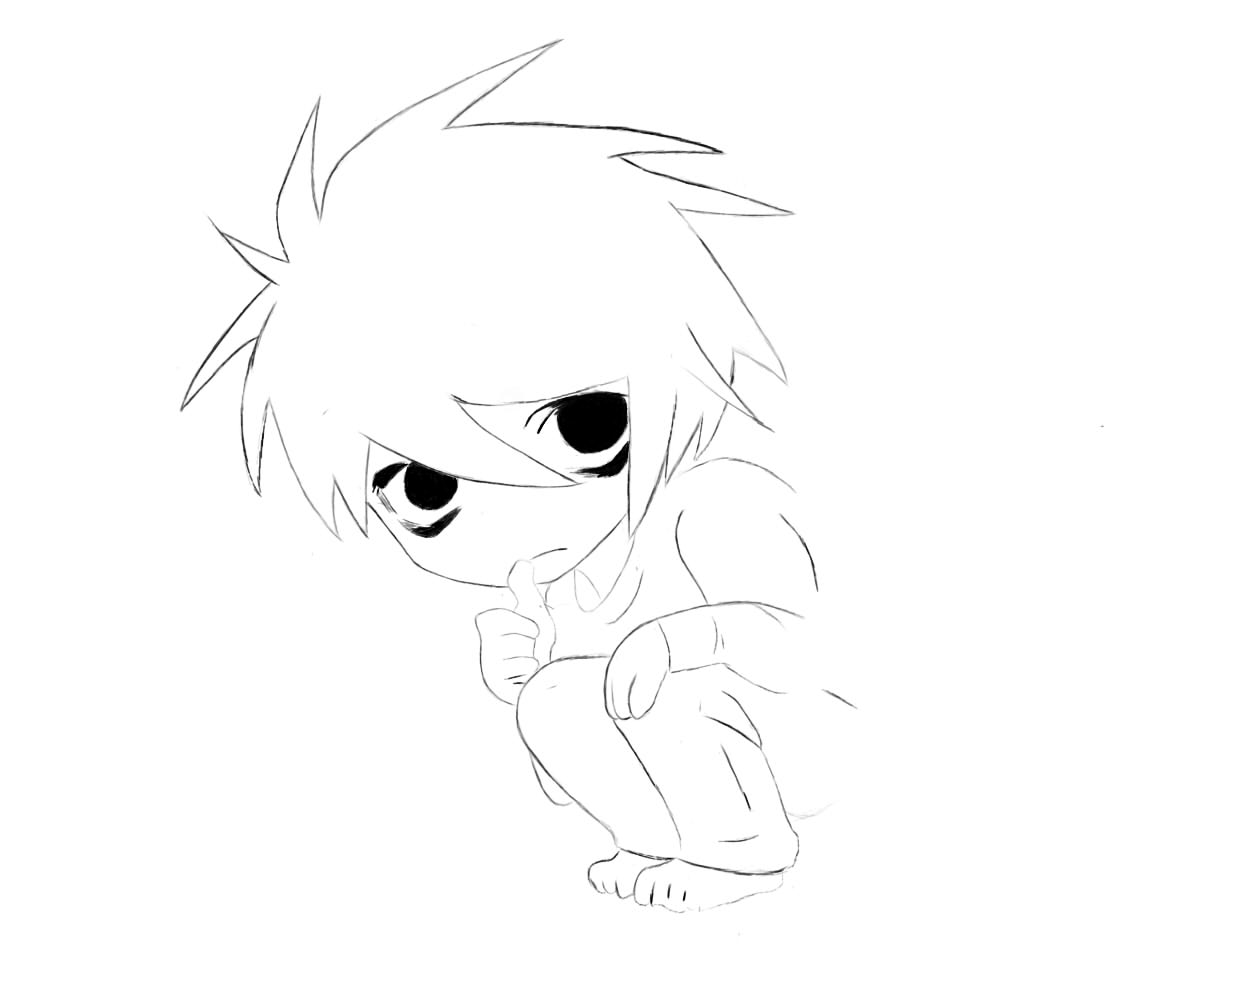 So I is working on L Lawliet...XP by Tamashii-Honoo